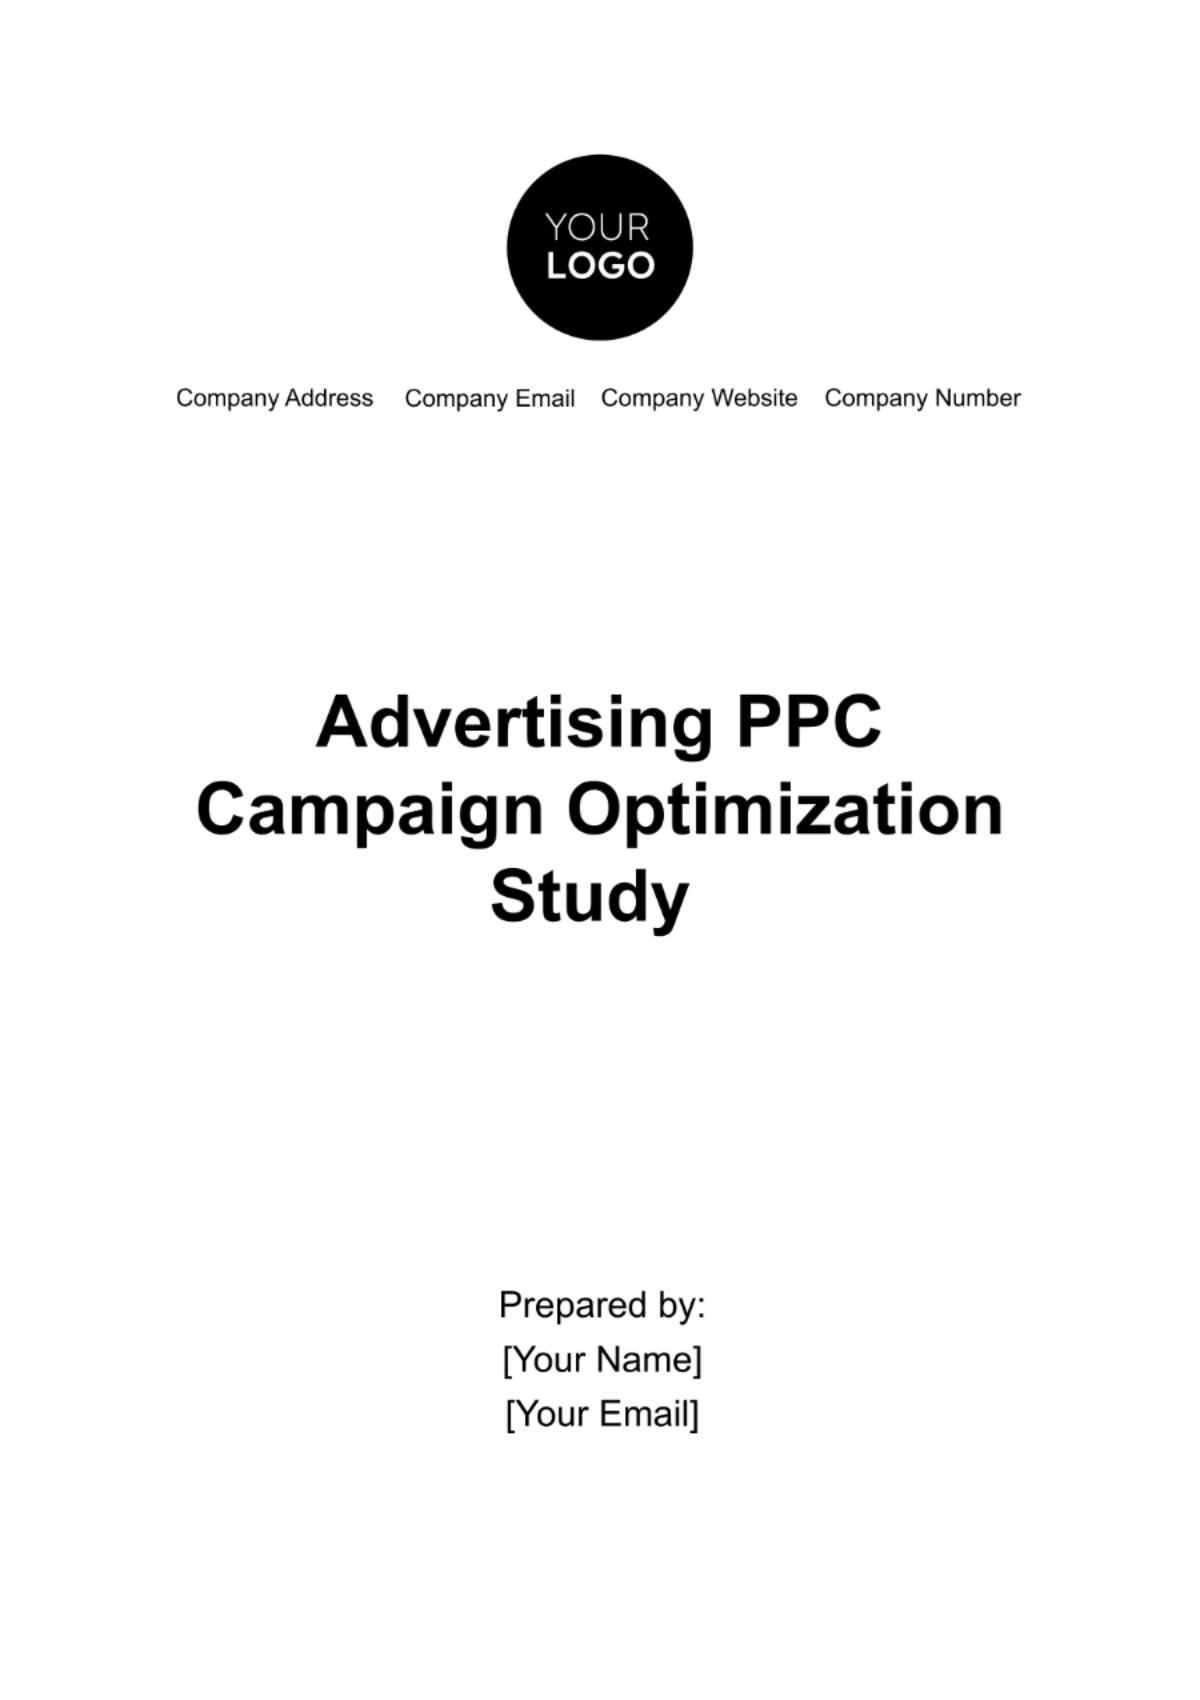 Free Advertising PPC Campaign Optimization Study Template